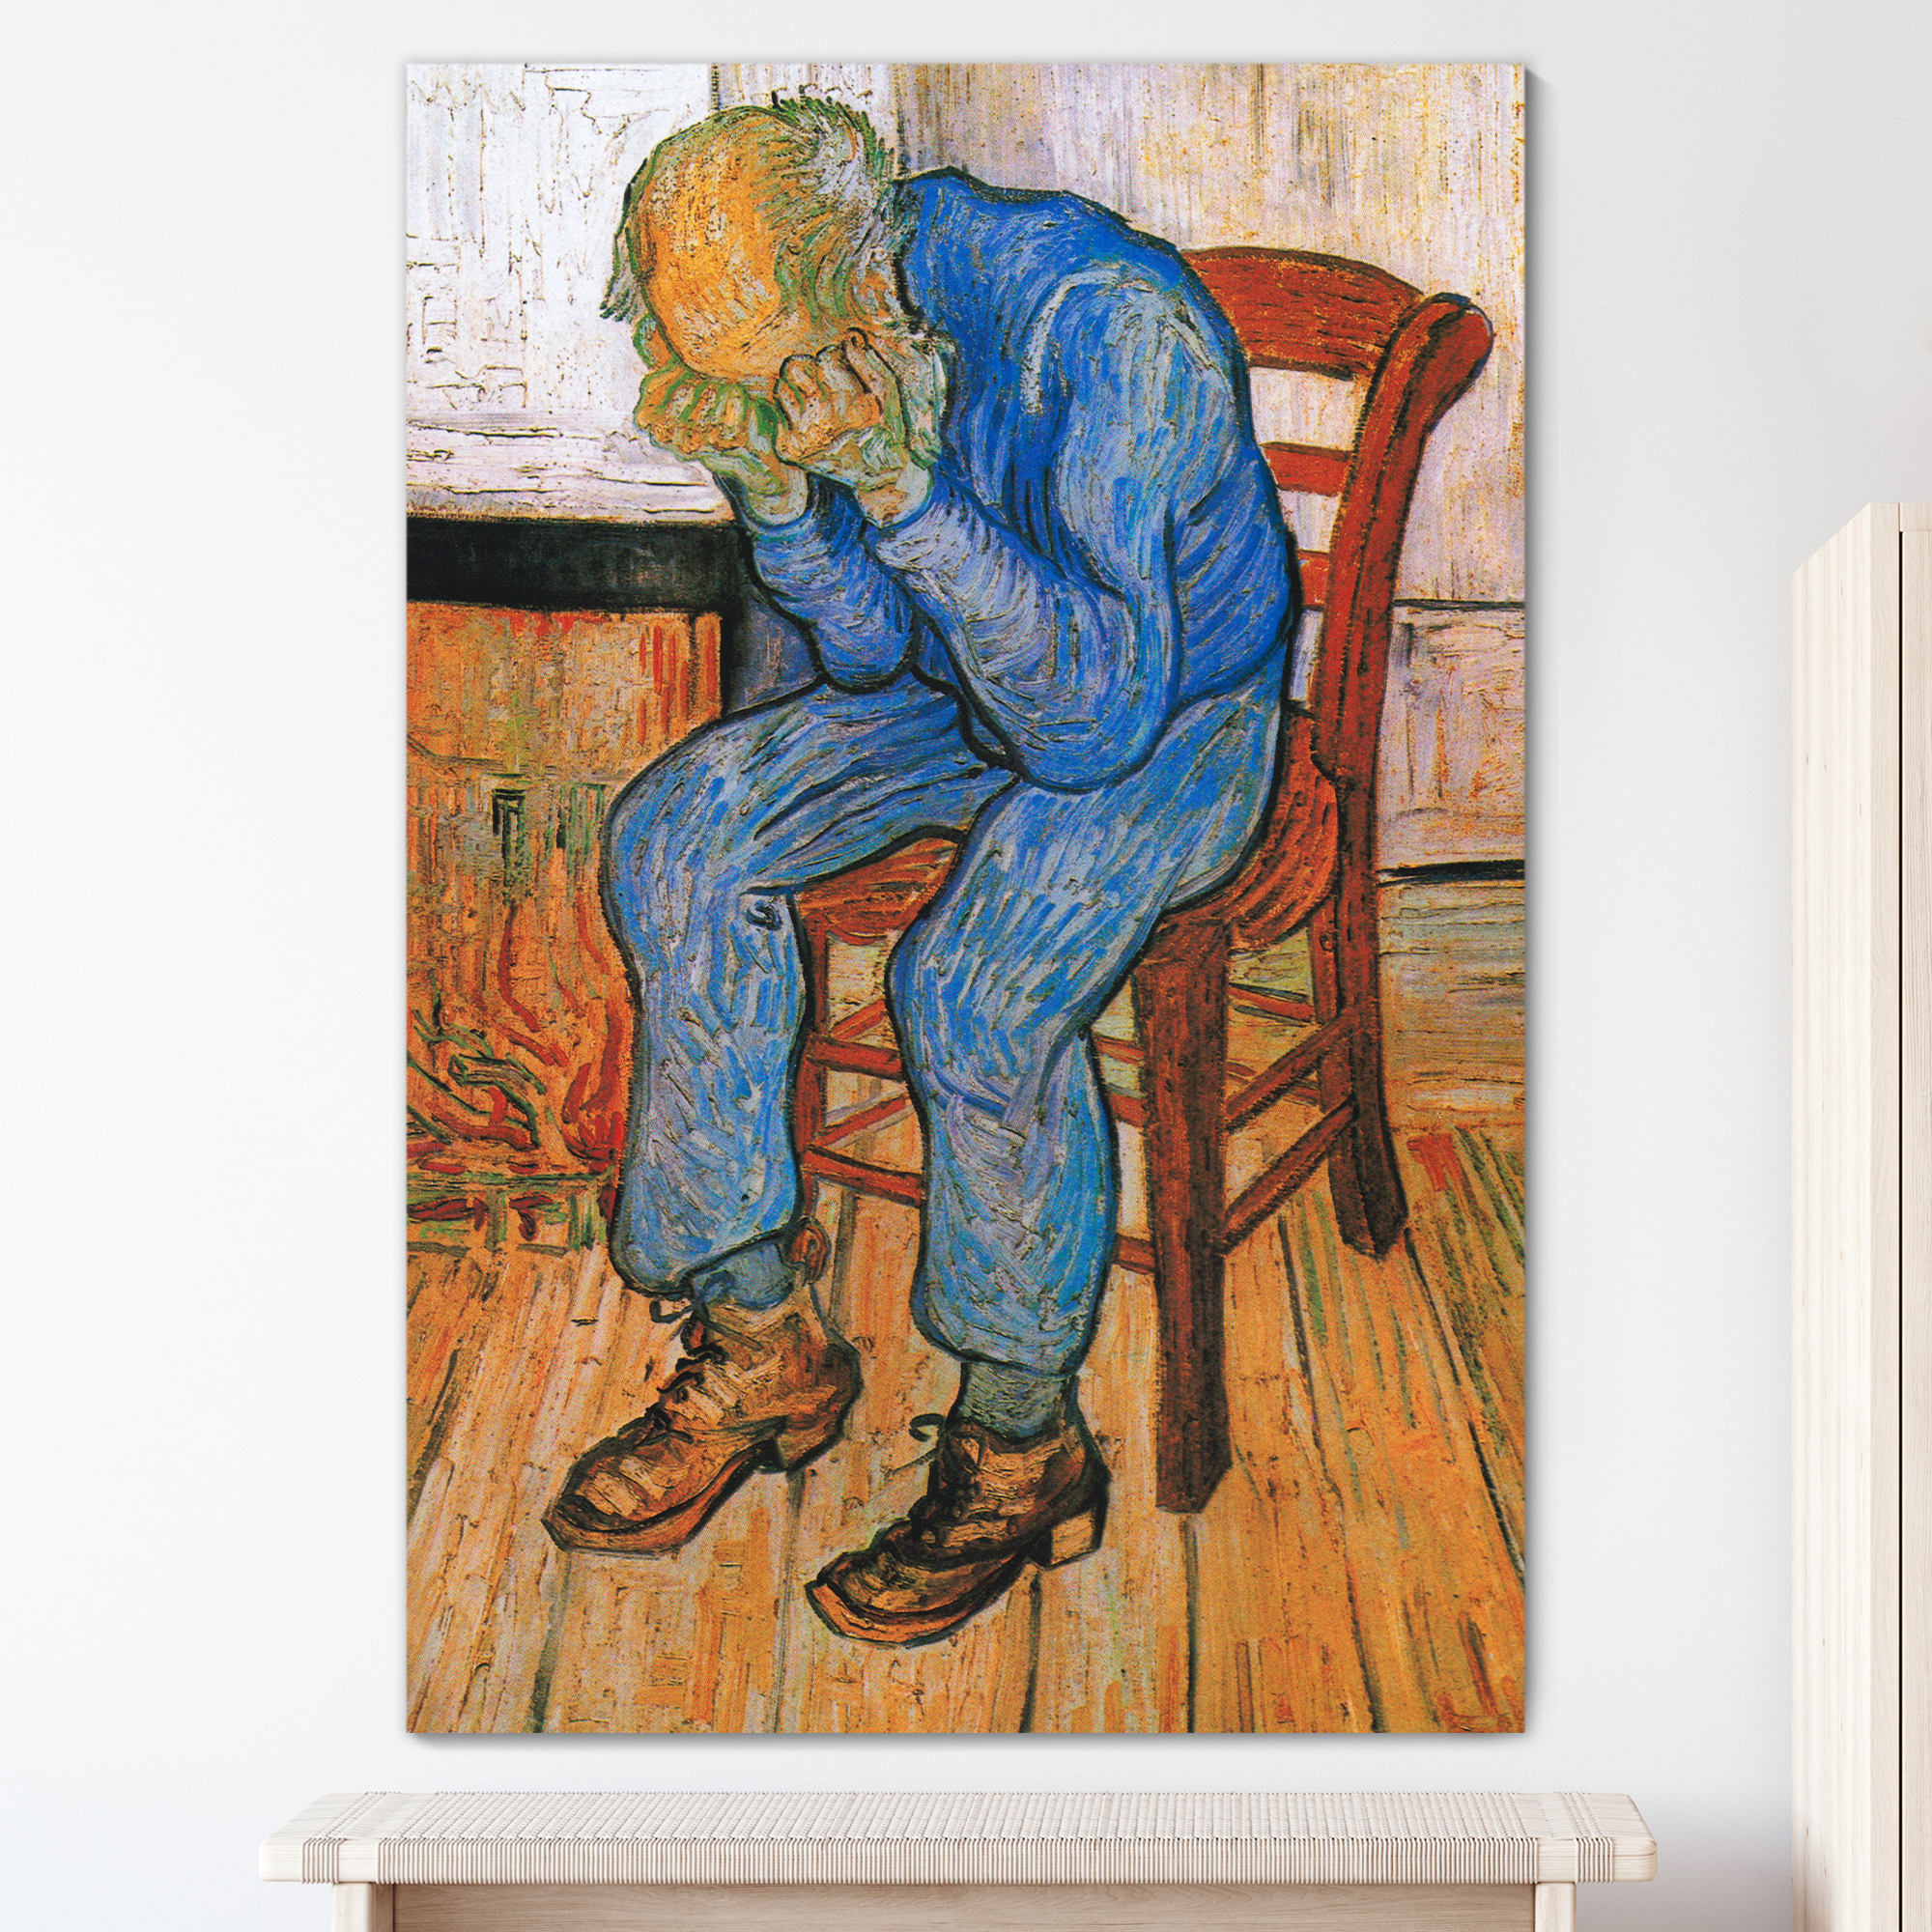 at Eternity's Gate (or Sorrowing Old Man) by Vincent Van Gogh - Oil Painting Reproduction on Canvas Prints Wall Art, Ready to Hang - 32